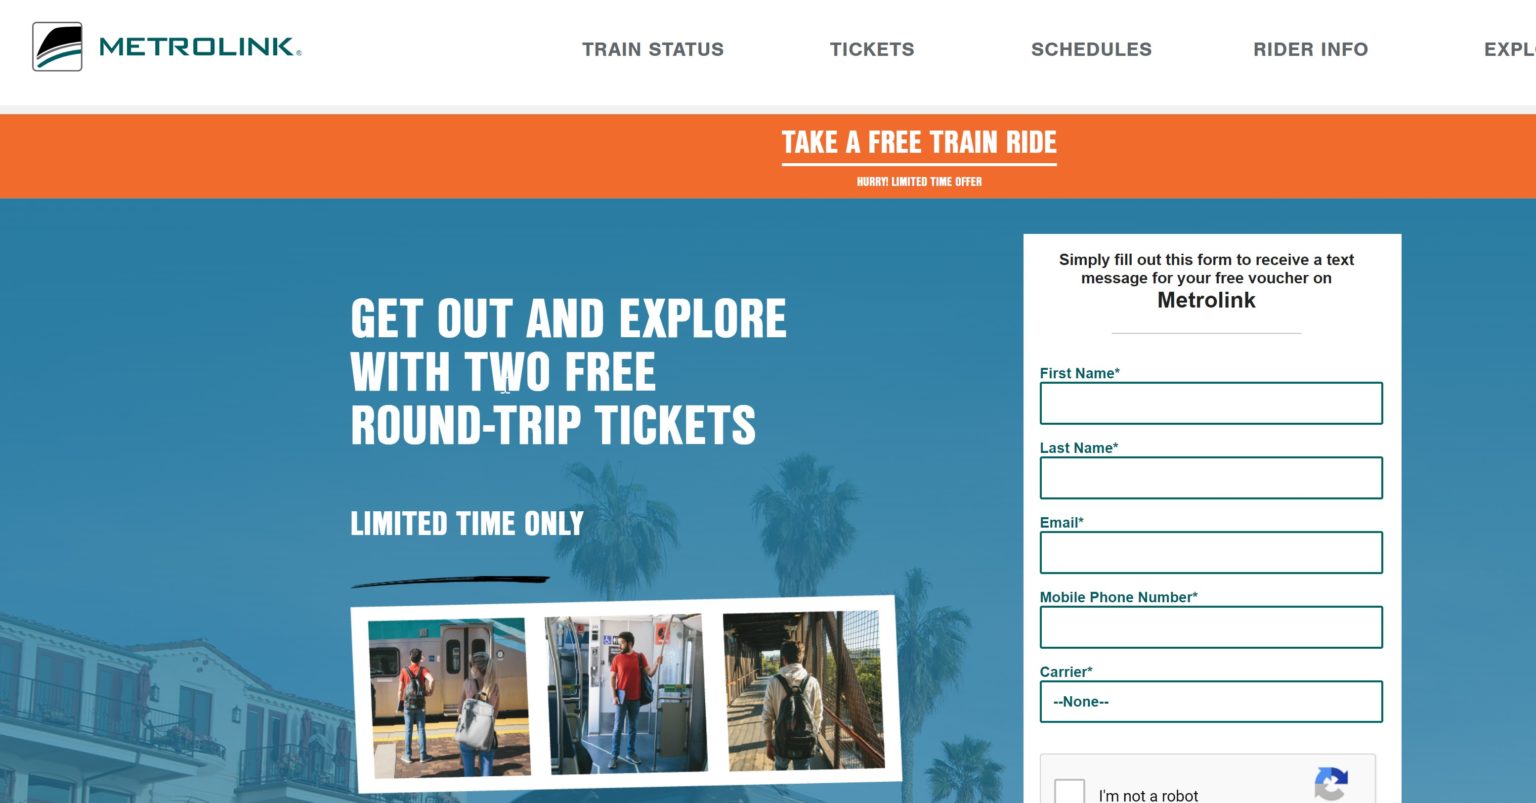 (EXPIRED) Free Two roundtrip train tickets on Metrolink (Southern